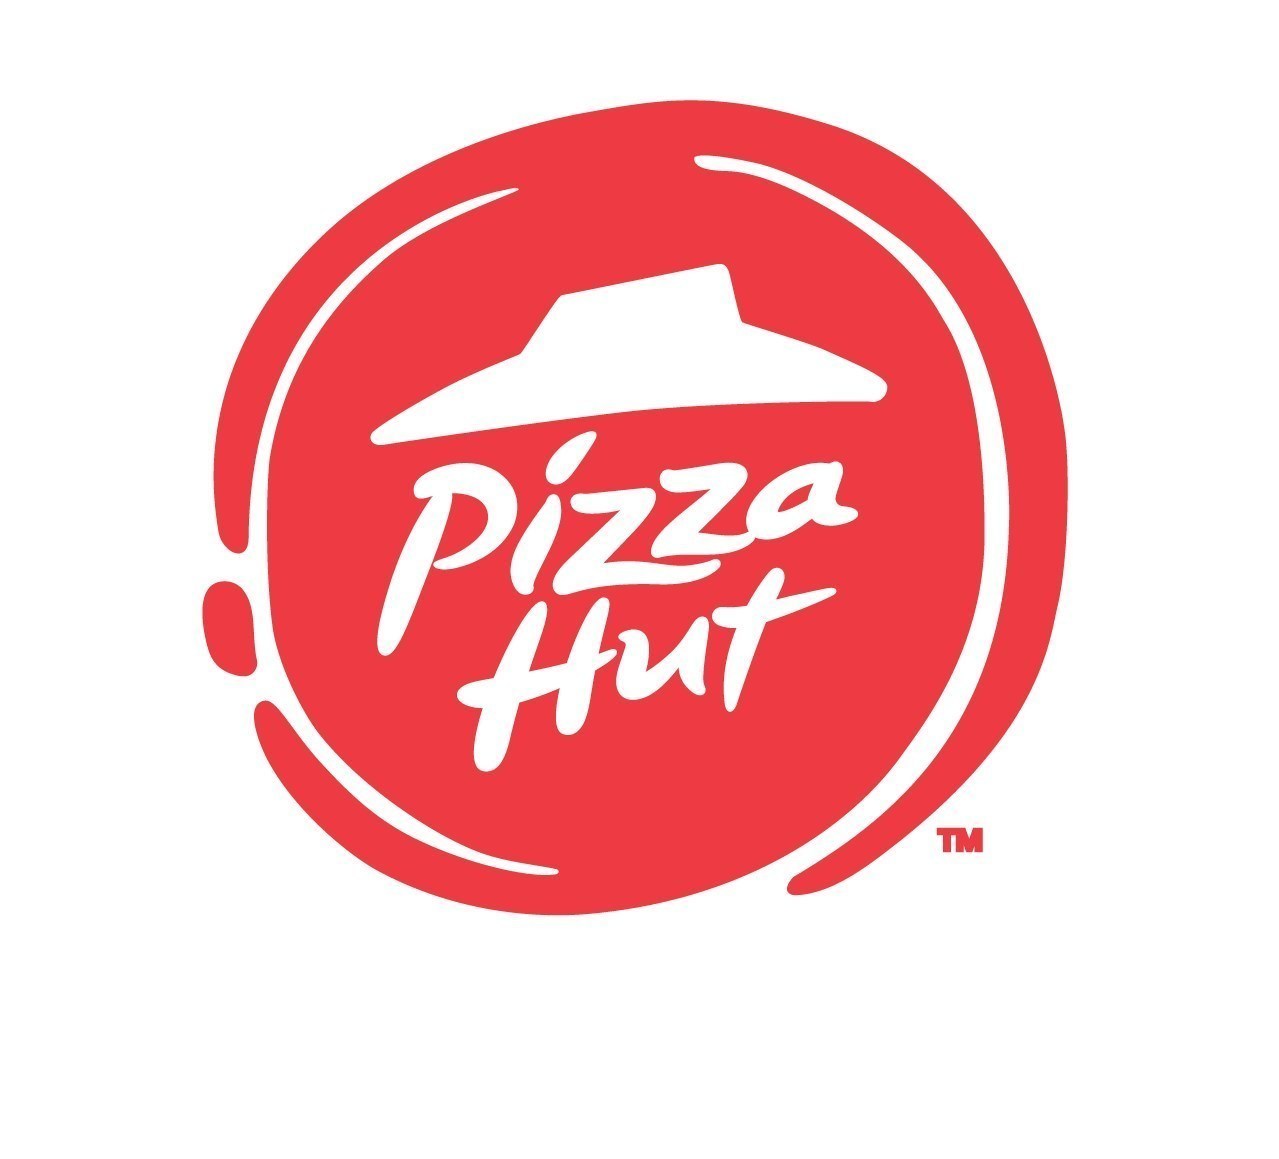 Pizza Hut Launches 5 Lineup Stacked With Pizzas And Other Craveable Menu Options